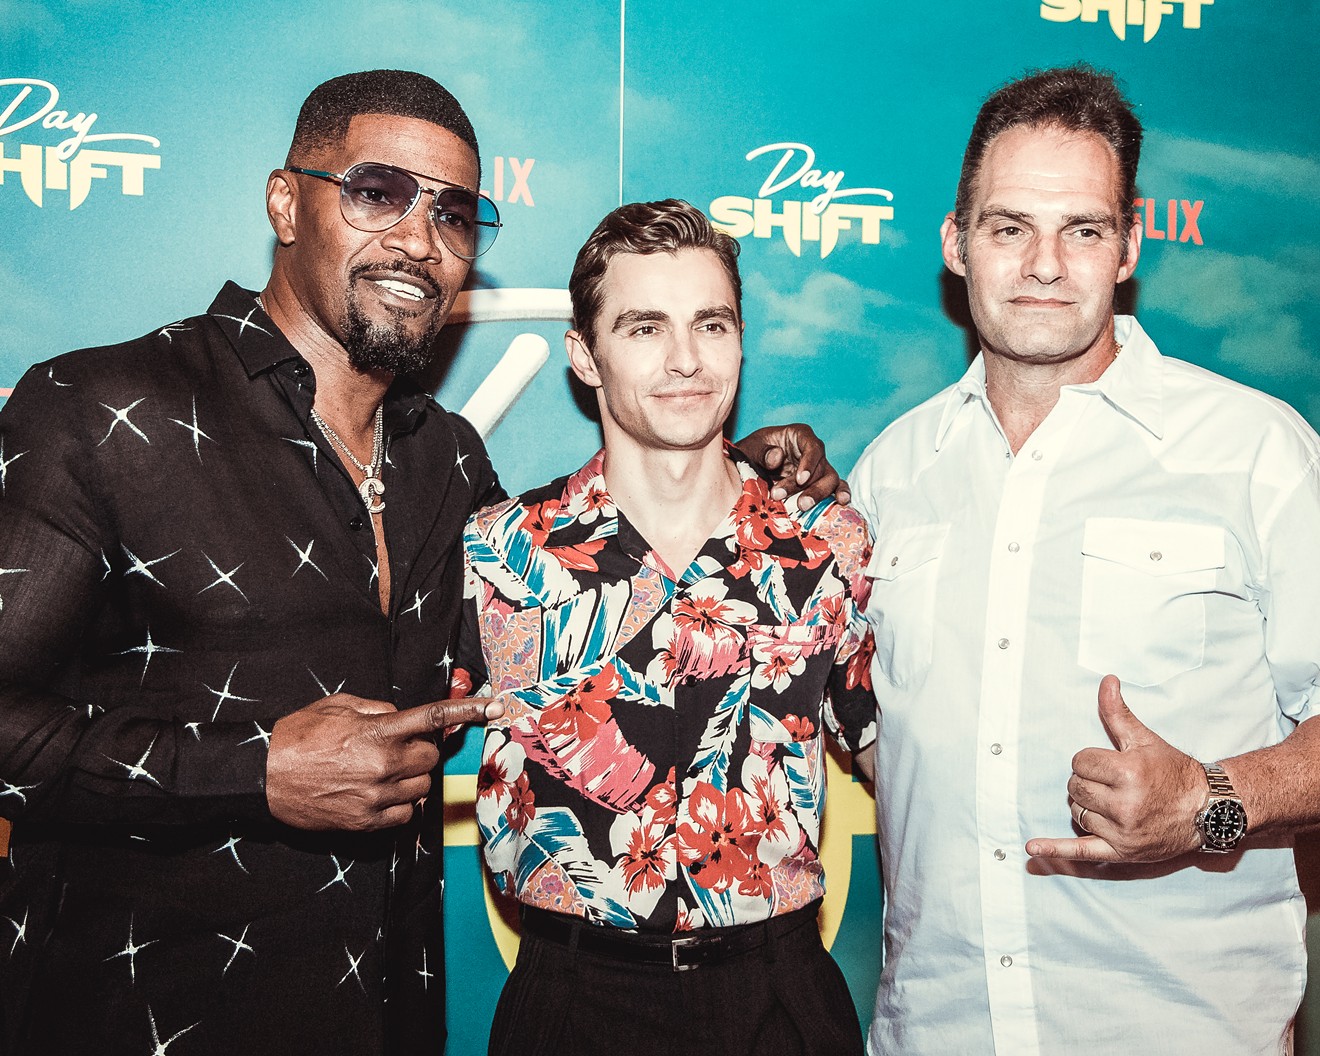 Jamie Foxx, Dave Franco and director J.J. Perry talked vampires at the Dallas premiere of Day Shift.